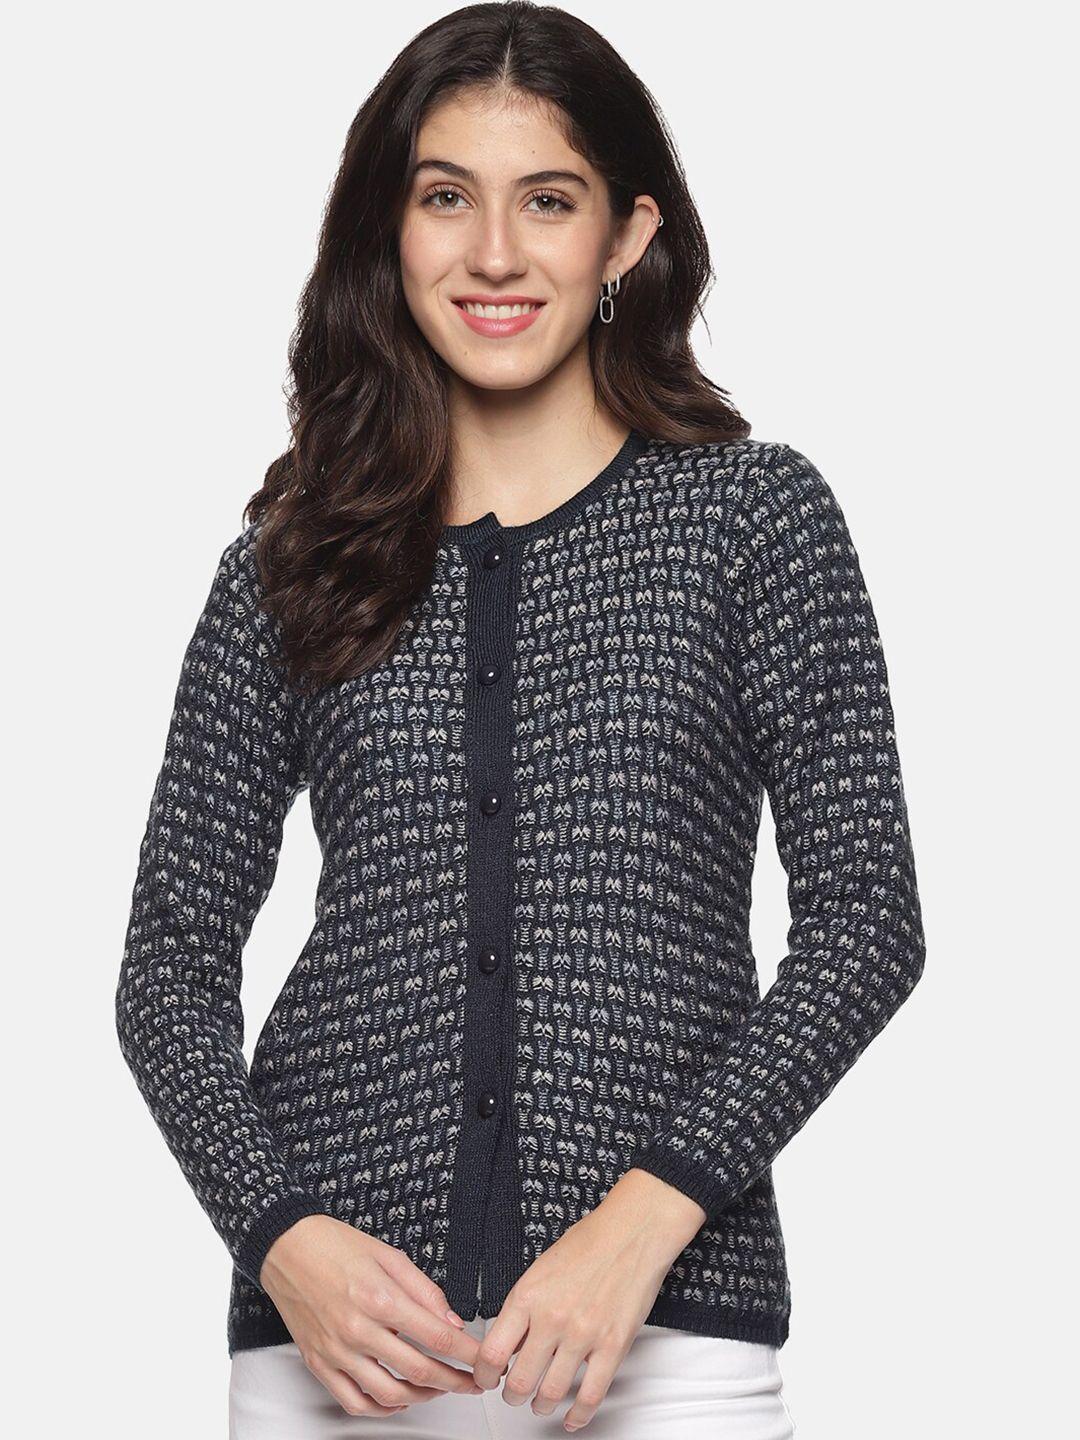 clapton women navy blue & grey cable knit woollen cardigan with applique detail